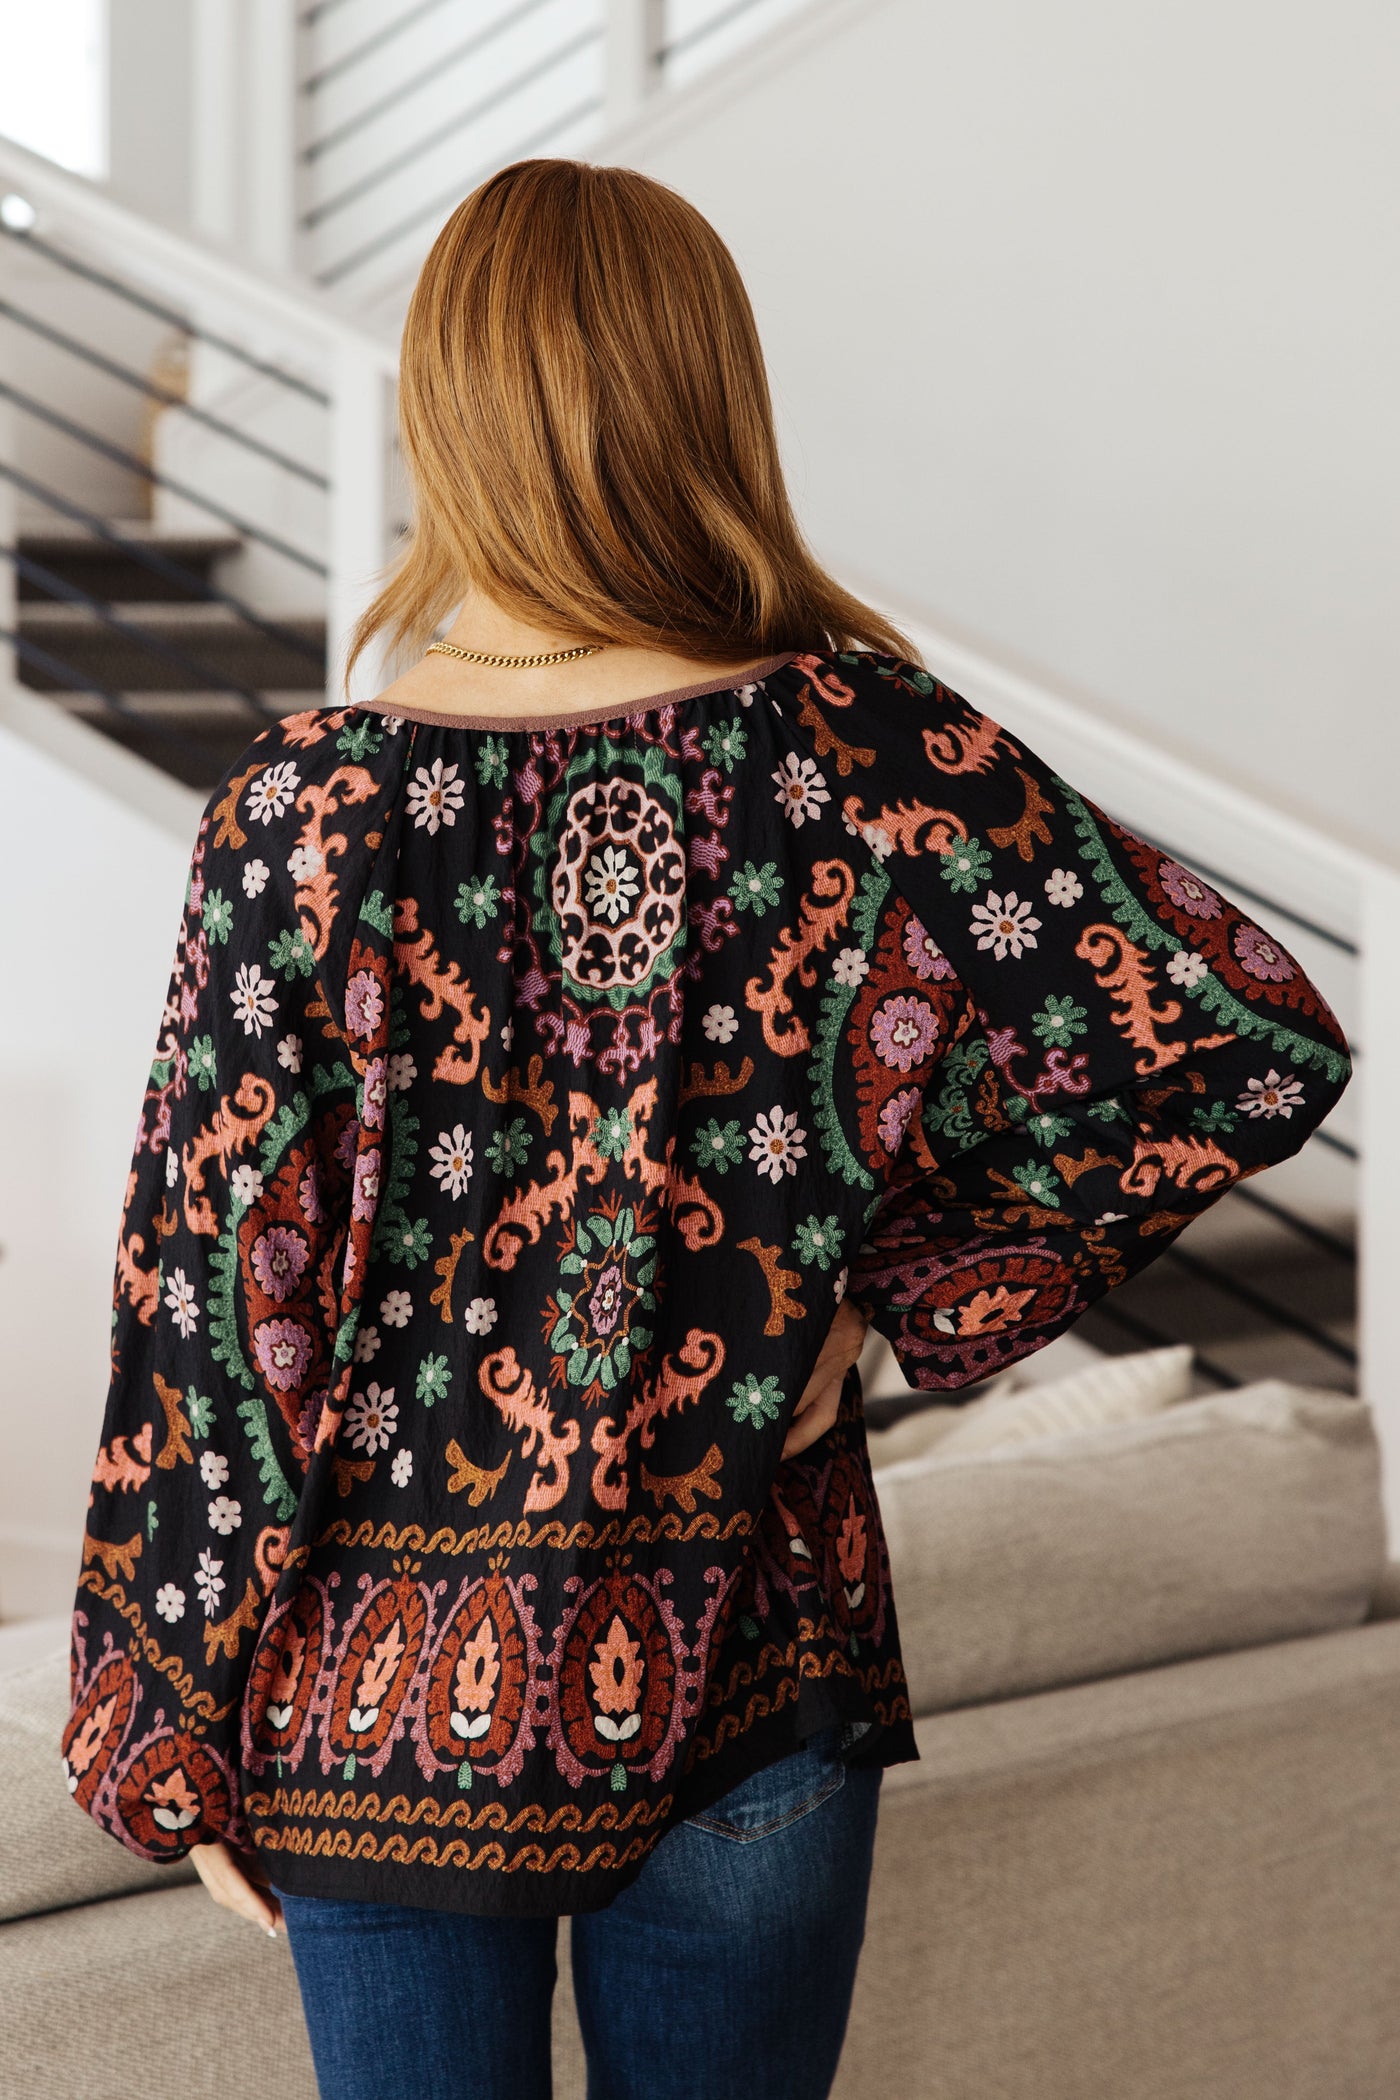 Be daring and vibrant with this I Feel That Peasant Blouse. This gorgeous blouse is beautifully textured with a woven fabric, features a tie-neck keyhole, and is accented with a vibrant boho border print in rich colors